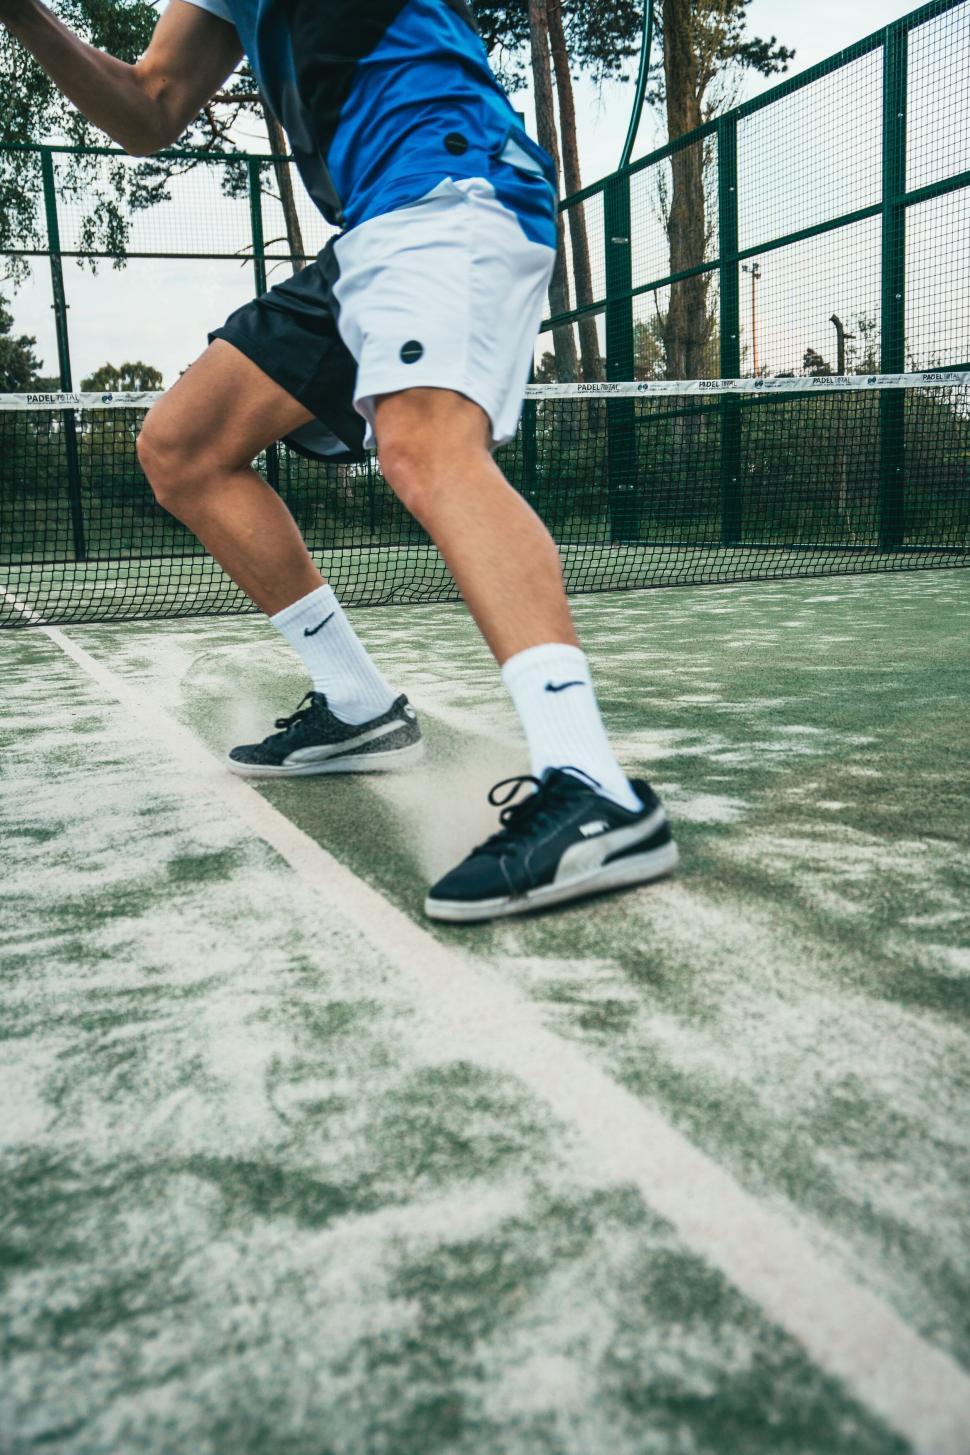 Free Image of Athletic moment on a tennis court 